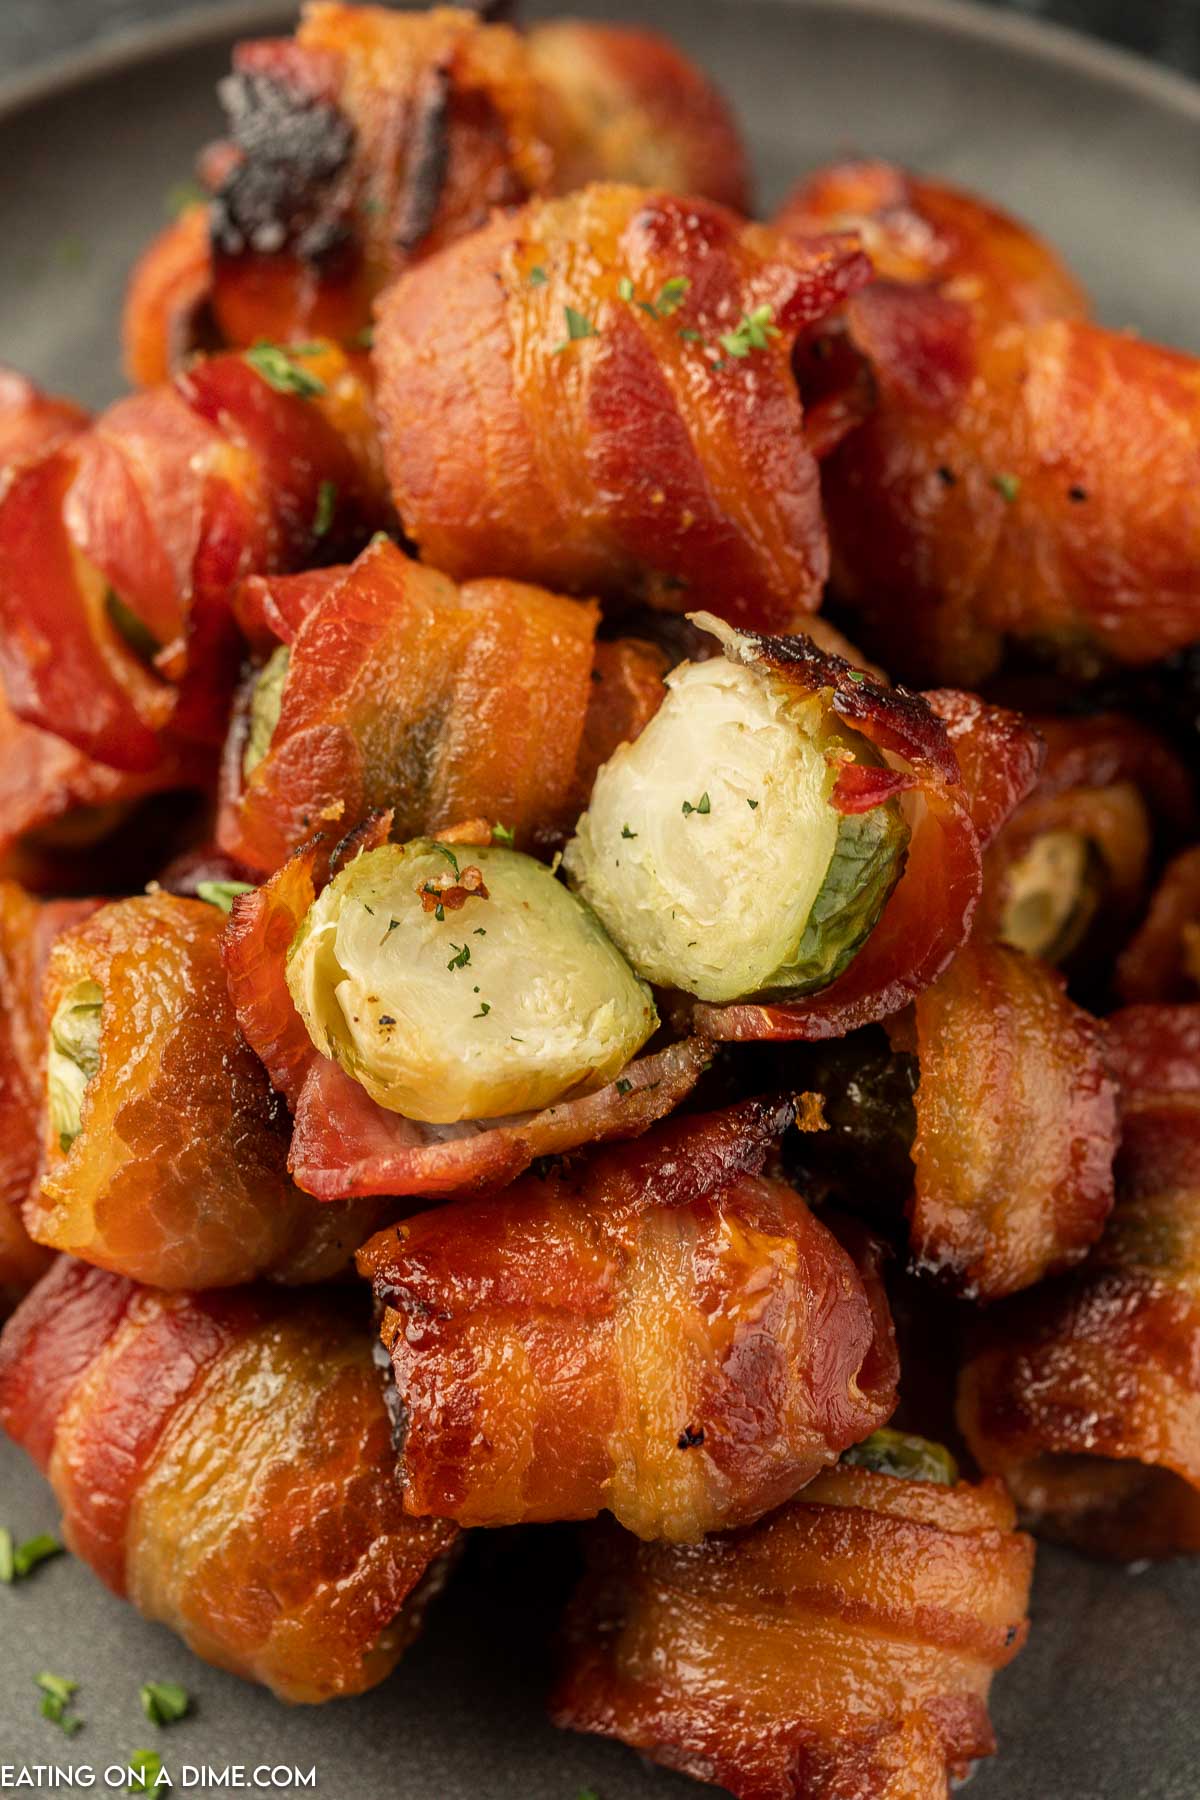 Bacon Wrapped Brussel Sprouts stacked